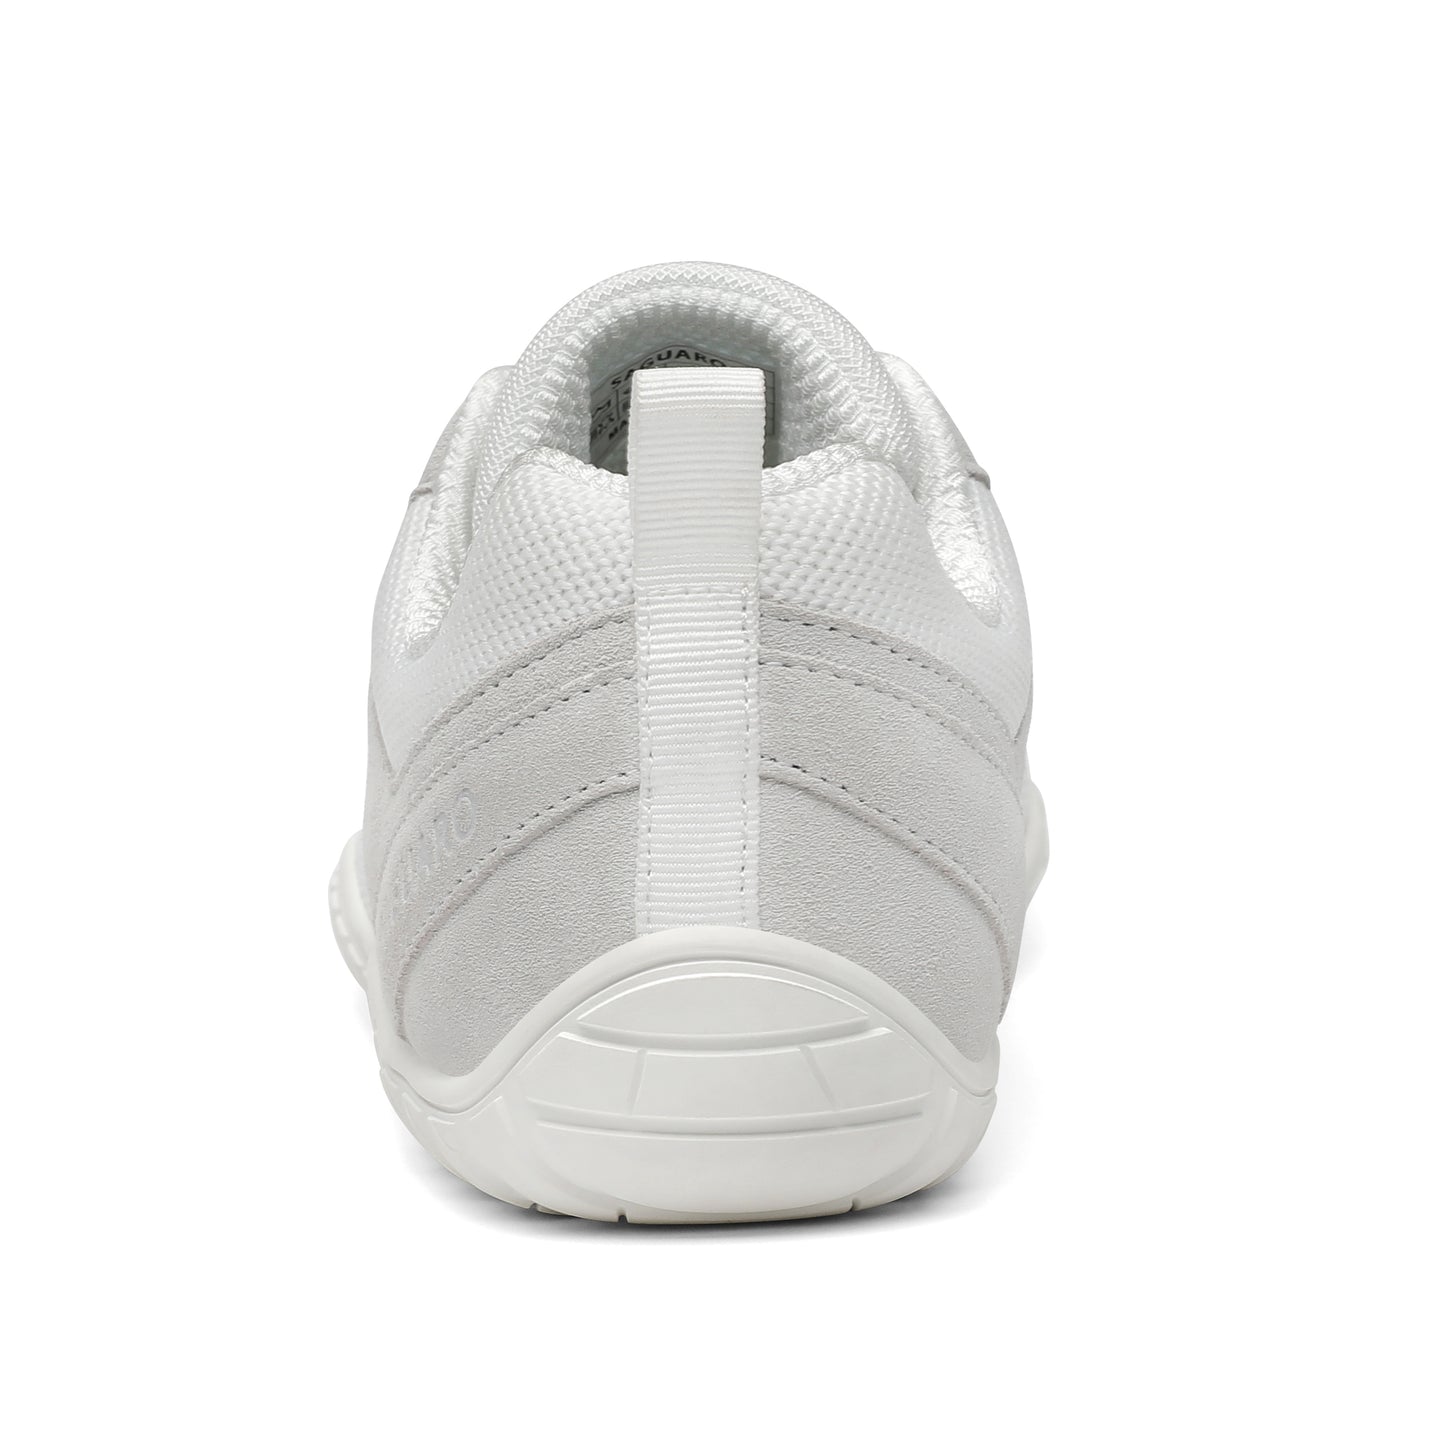 Wish I - Blanco - Casual Barefoot shoes